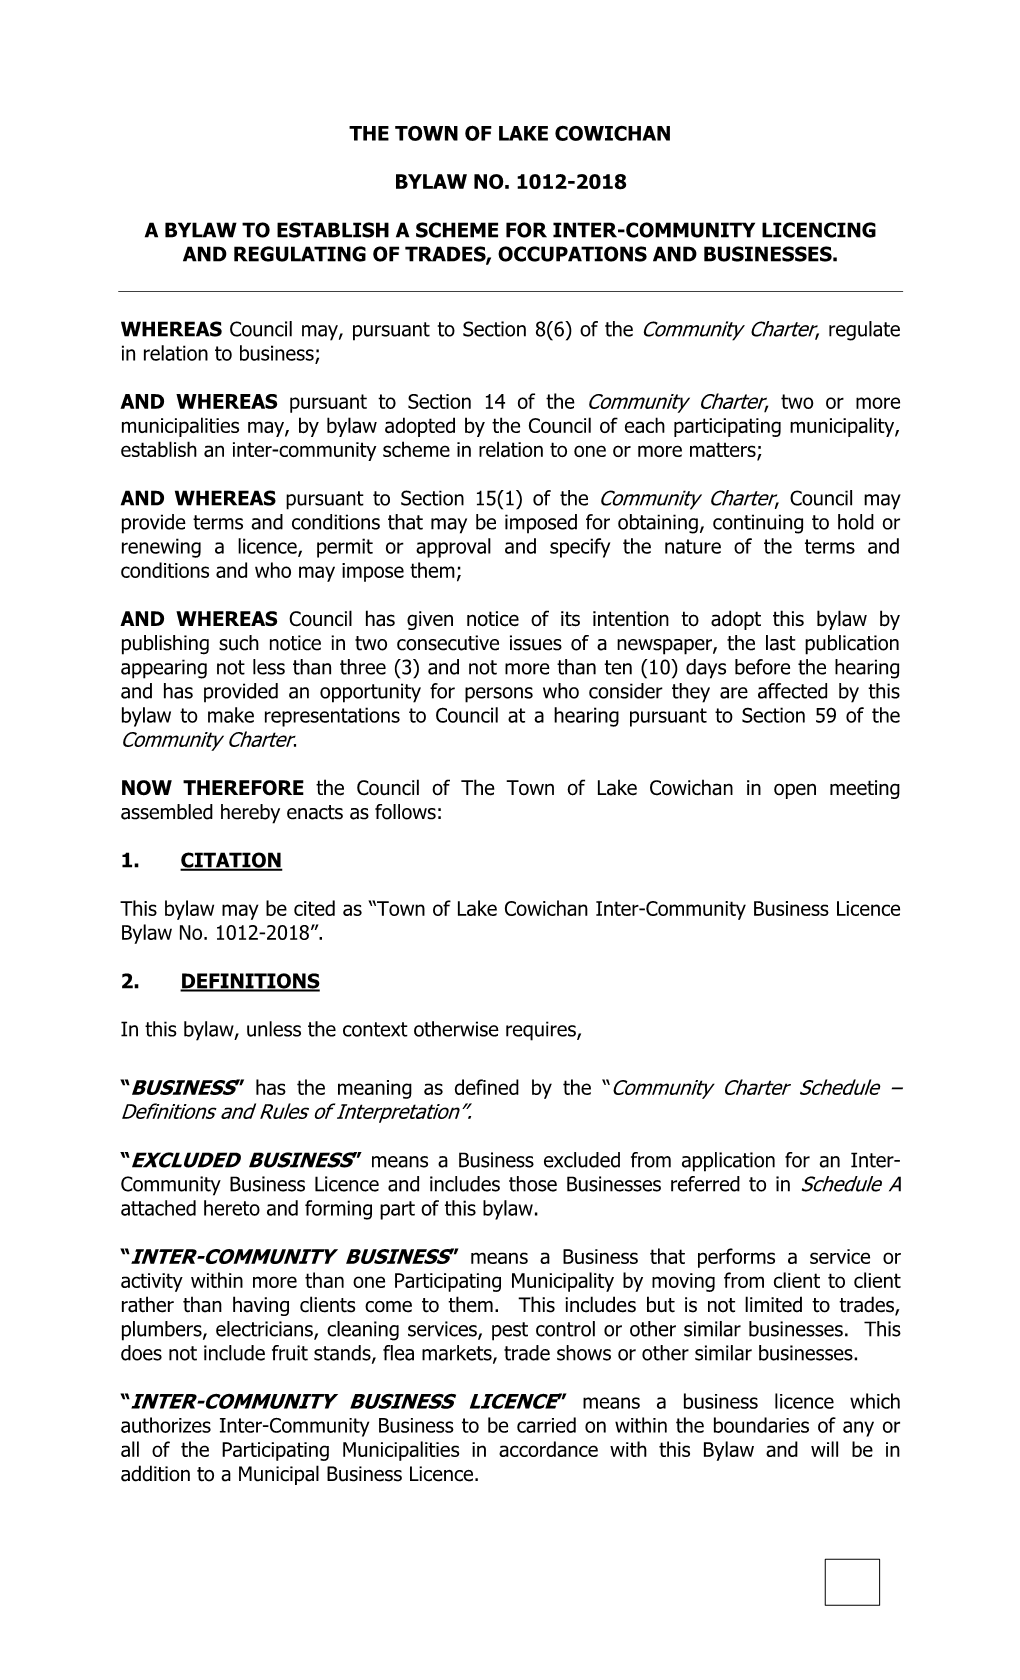 Town of Lake Cowichan Inter-Community Business Licence Bylaw No